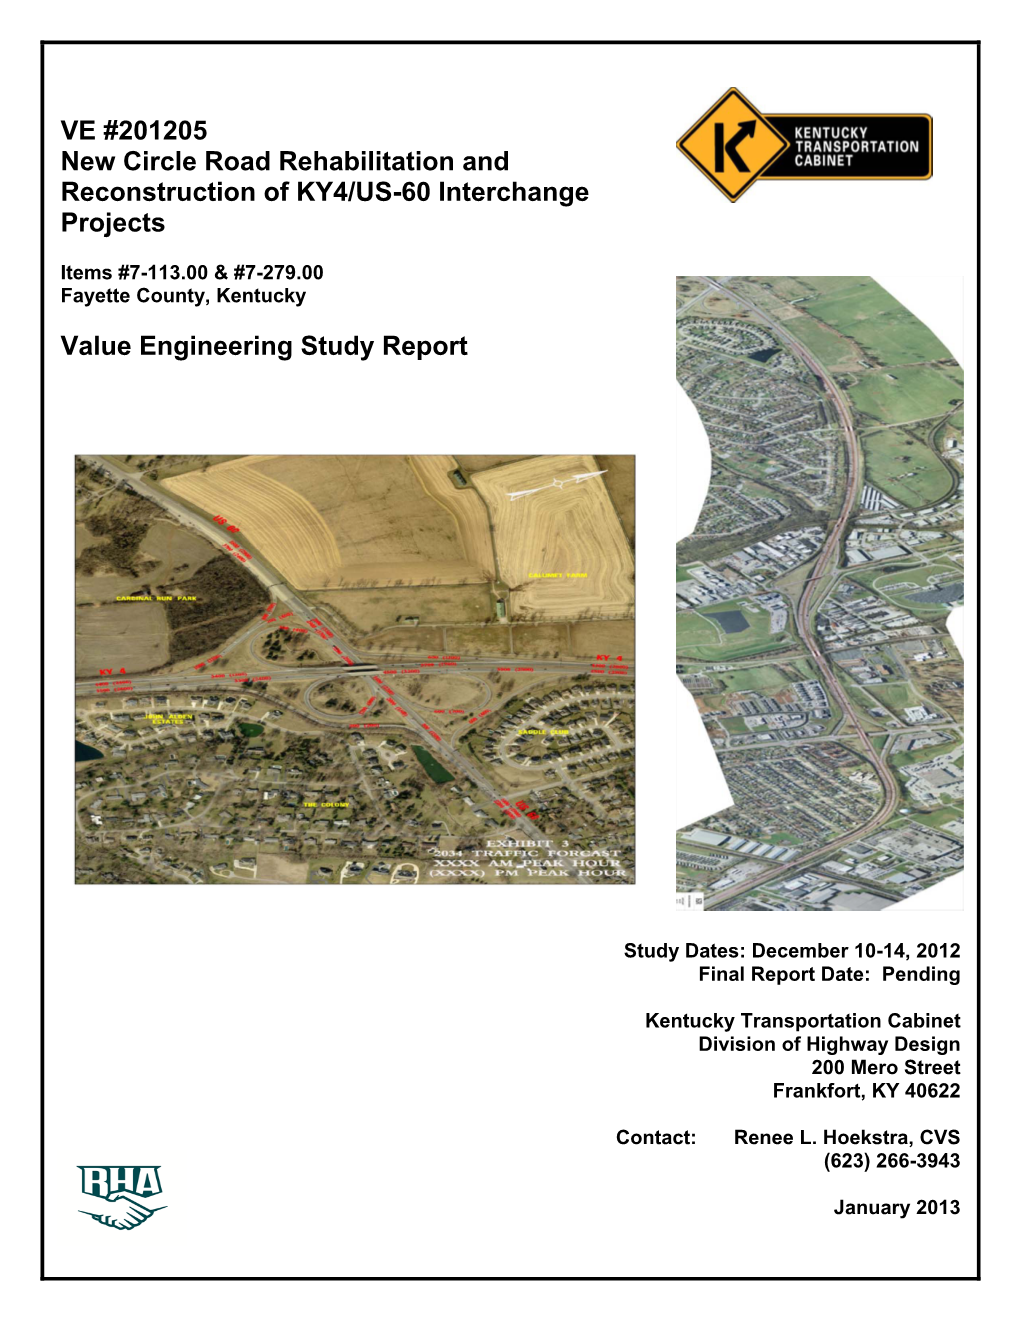 VE #201205 New Circle Road Rehabilitation and Reconstruction of KY4/US-60 Interchange Projects